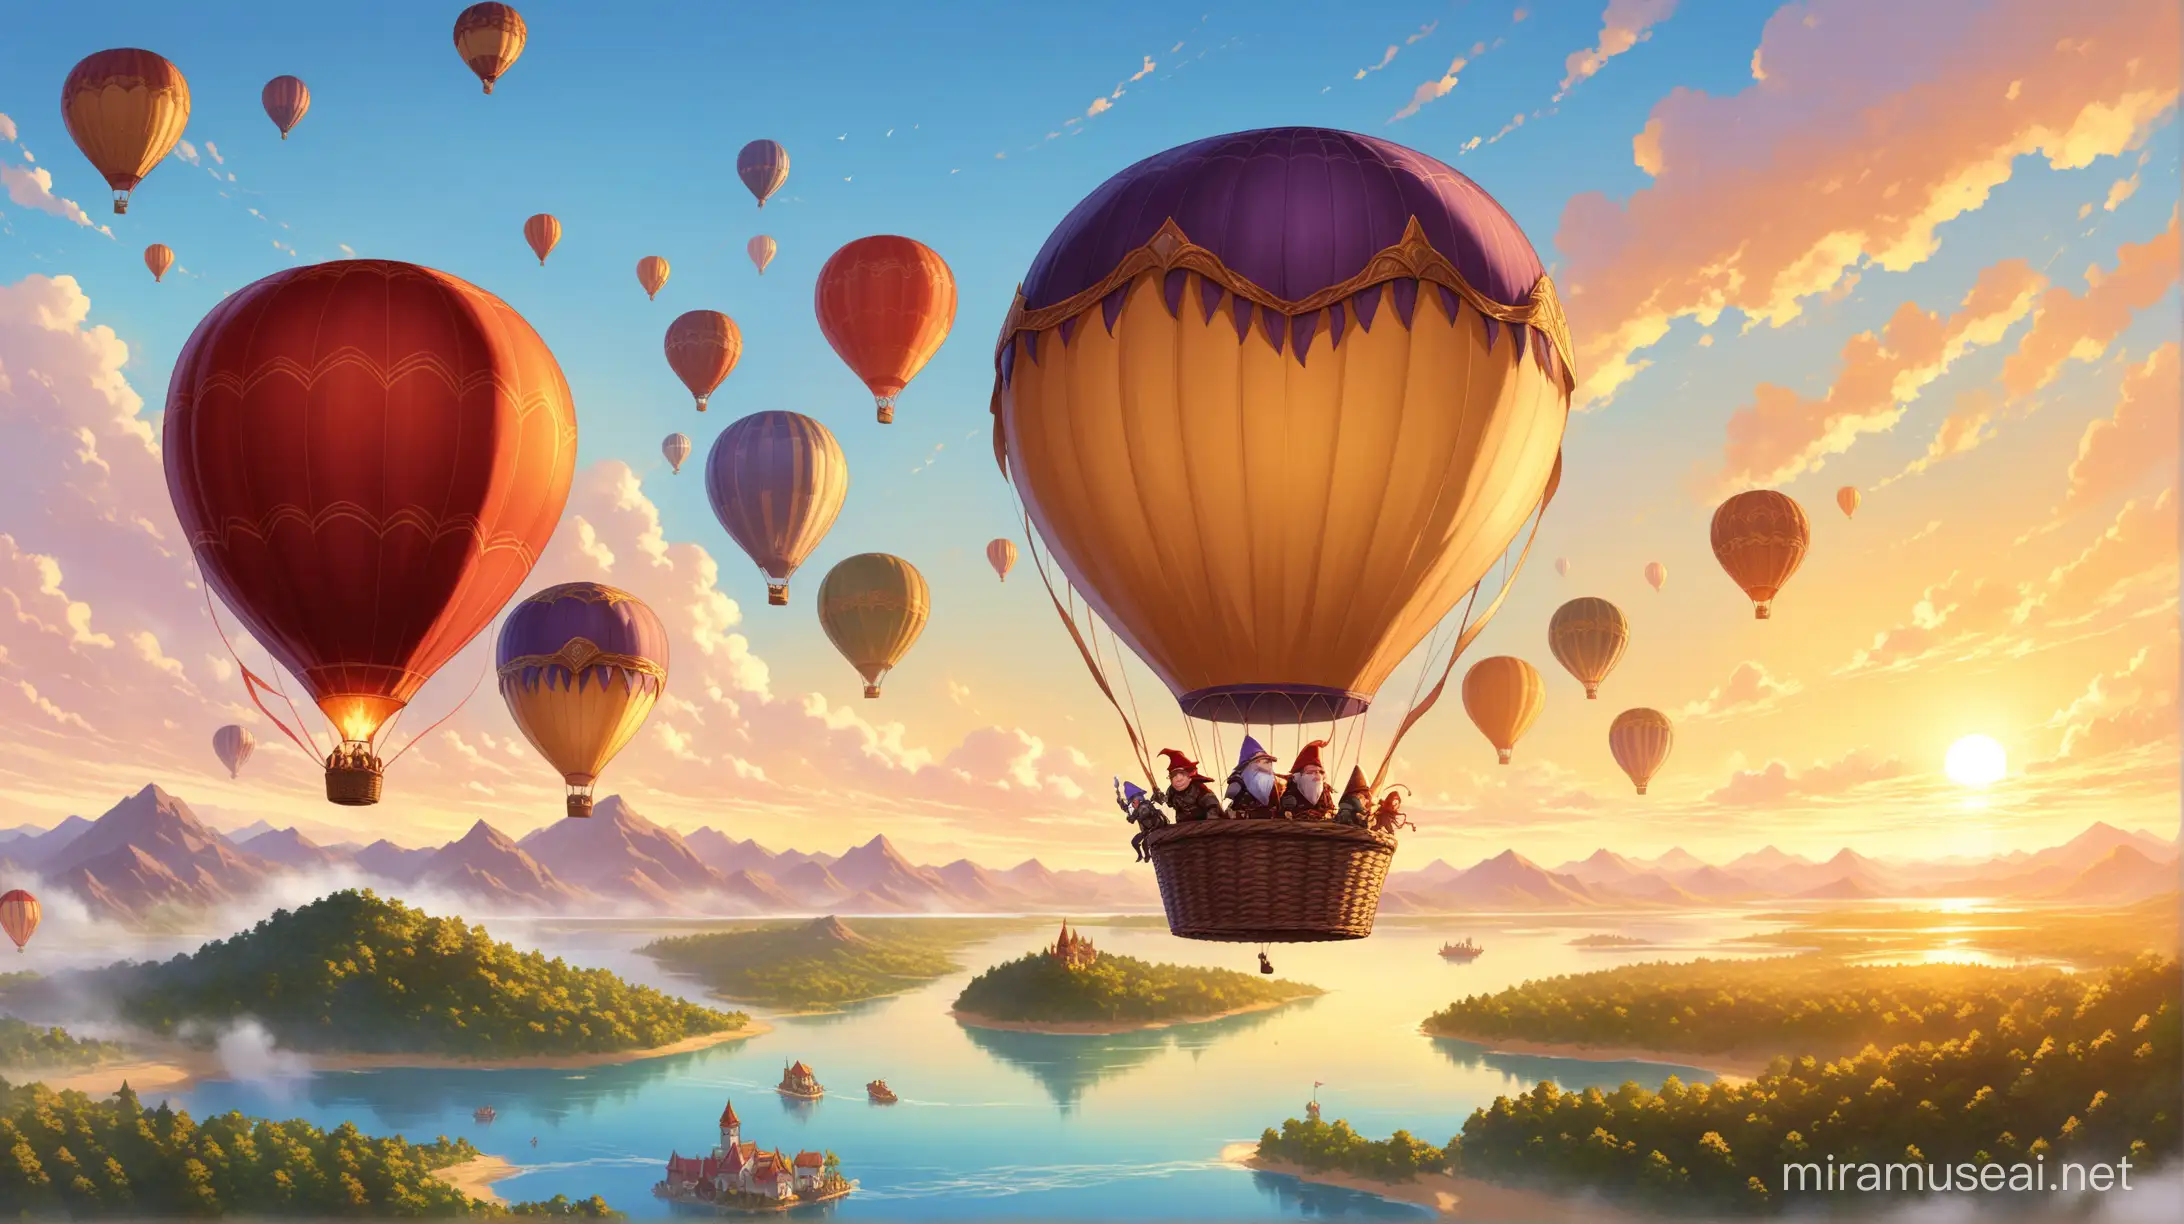 Fantasy Hot Air Balloon Adventure with Diverse Passengers